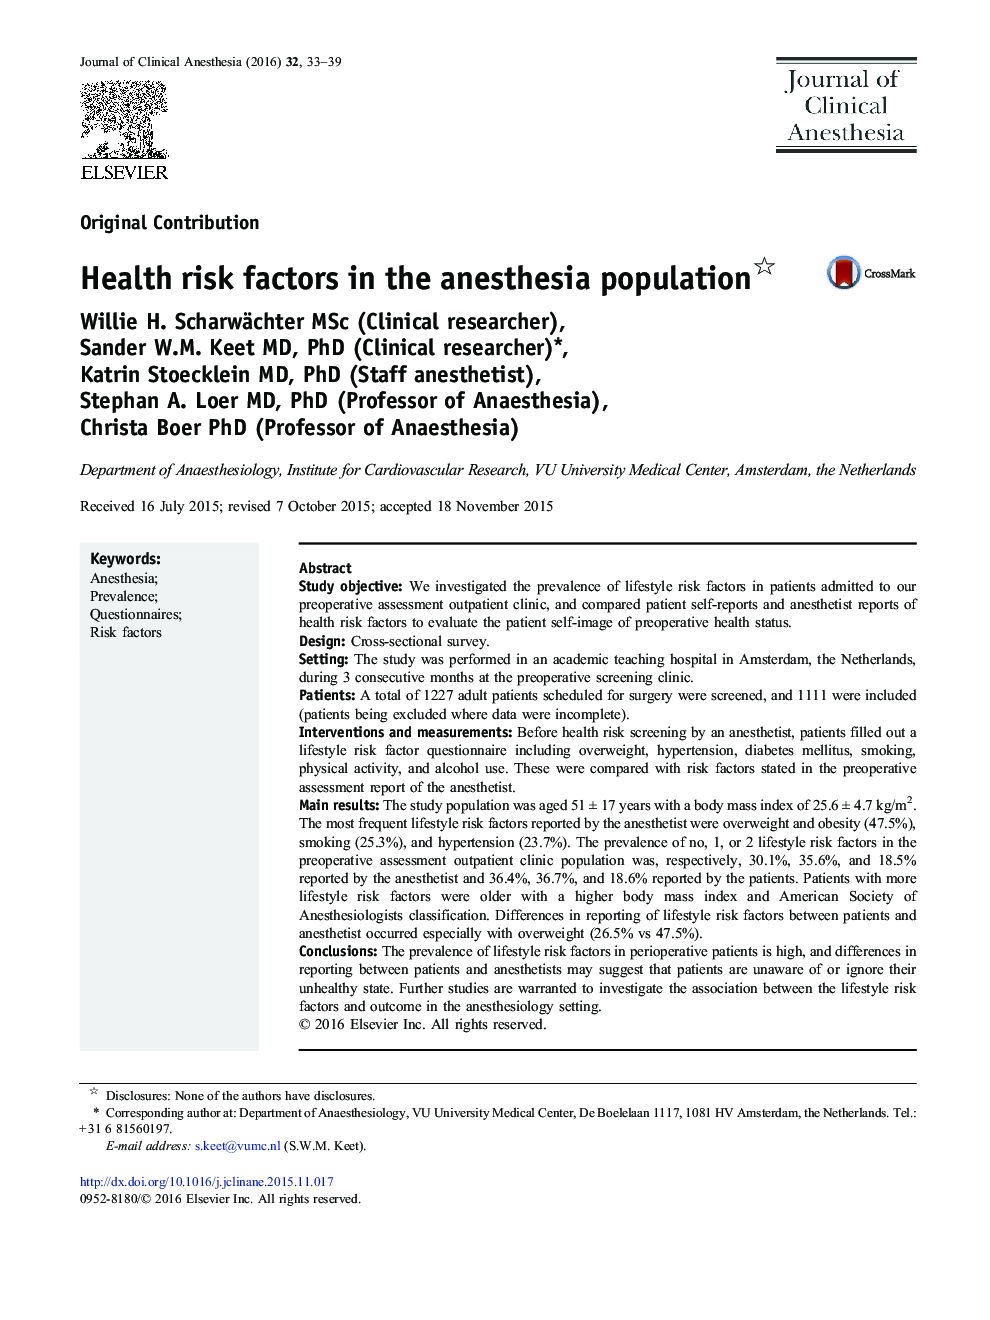 Health risk factors in the anesthesia population